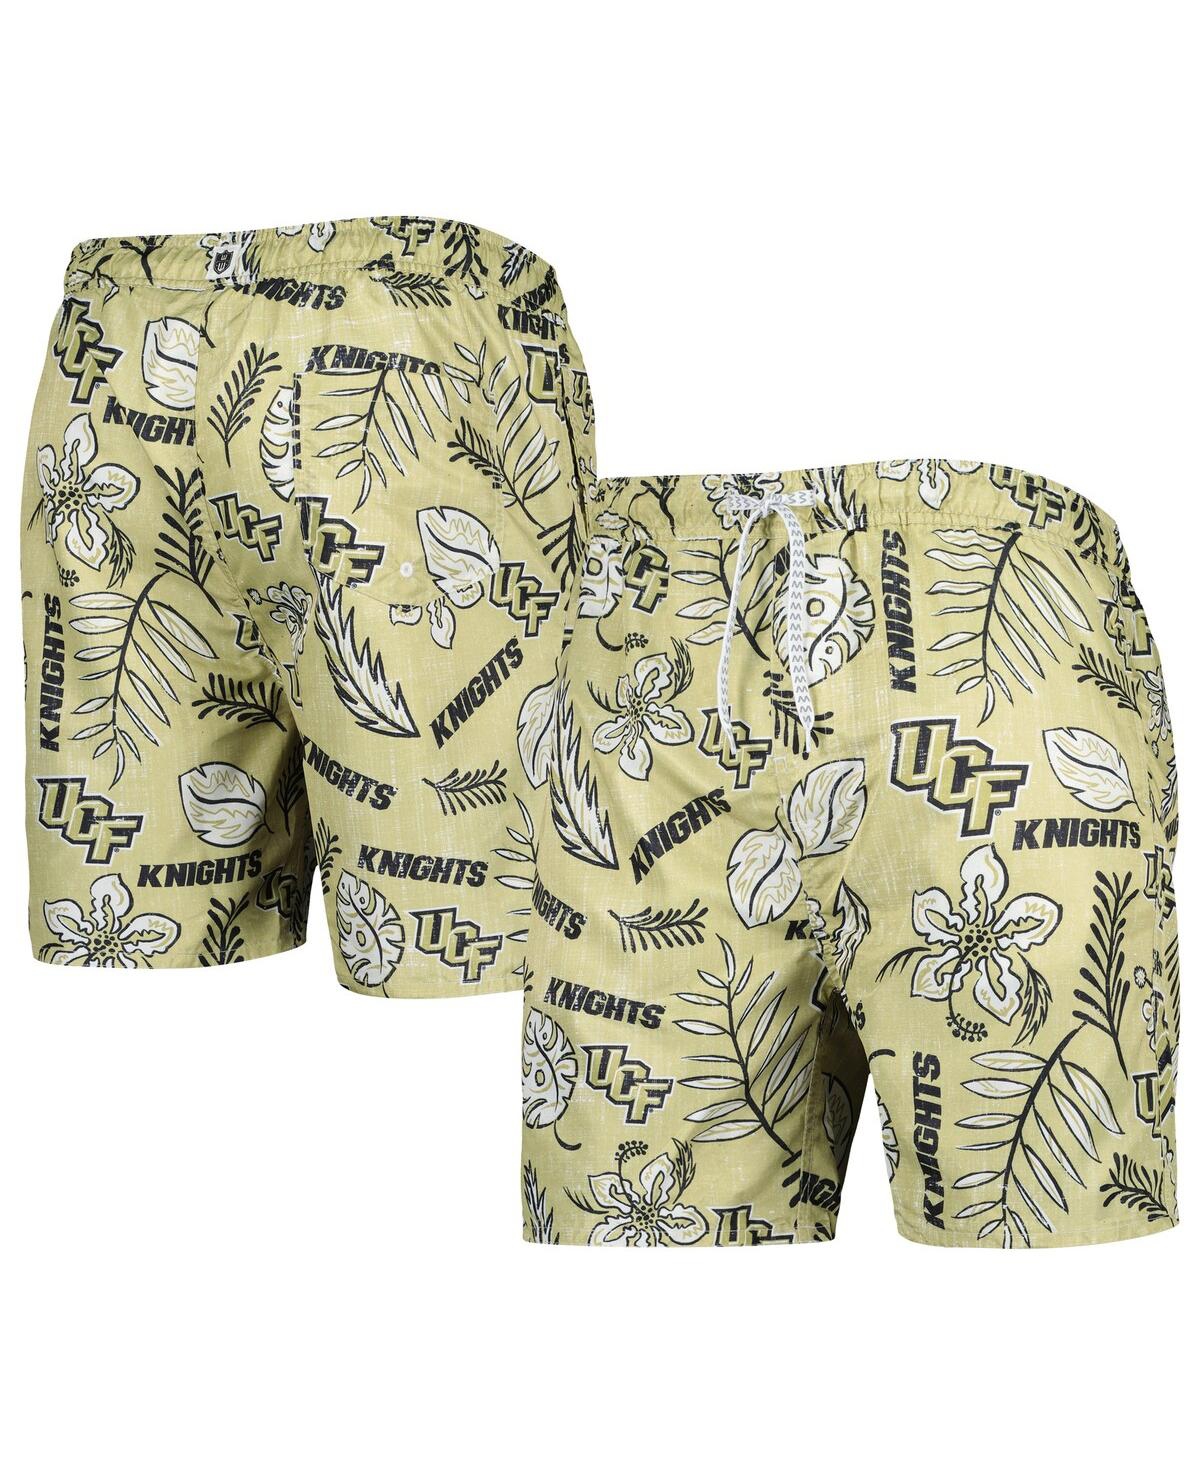 Shop Wes & Willy Men's  Khaki Ucf Knights Vintage-inspired Floral Swim Trunks